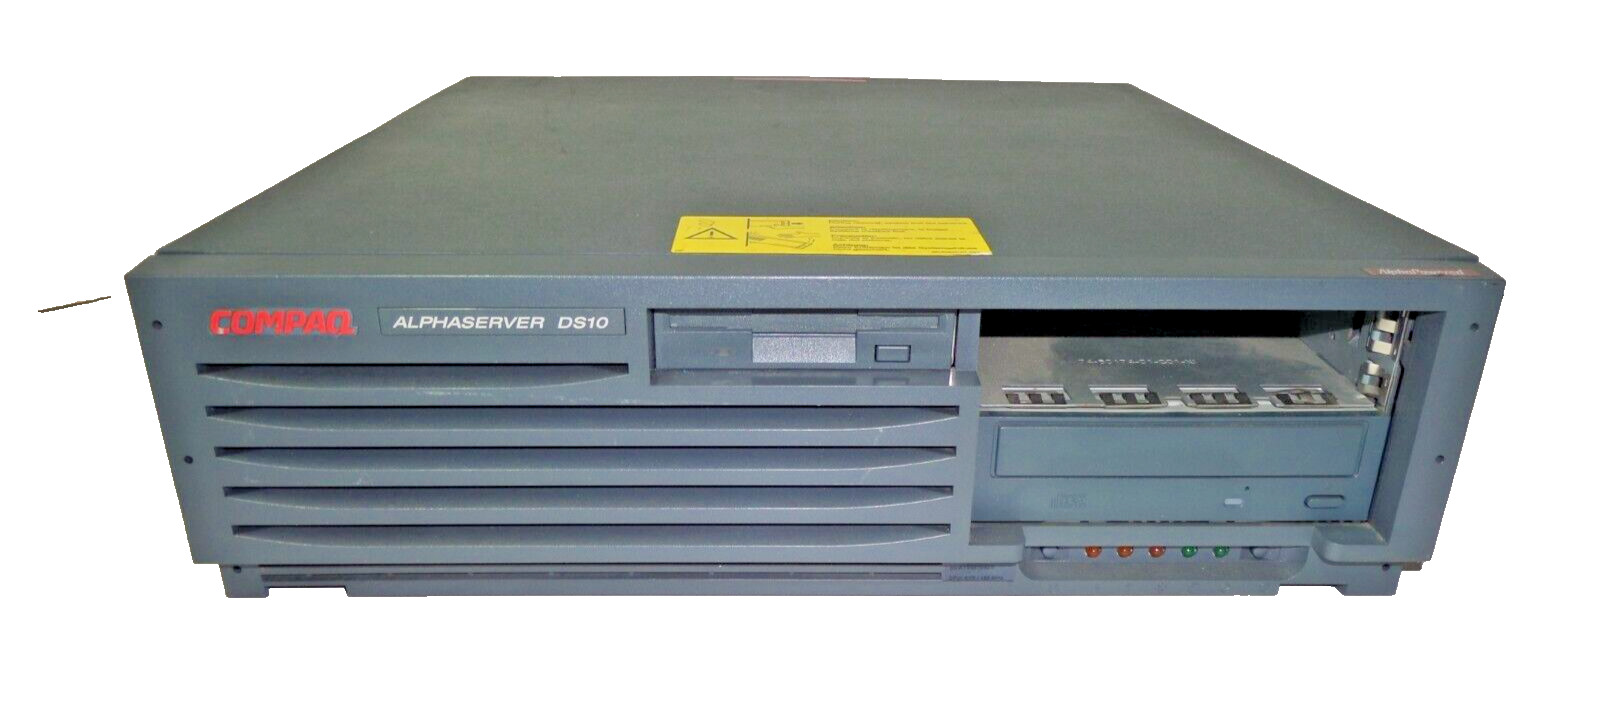 AlphaServer DS10 466MHz /1GB RAM /Graphics Card, NO HDD.  \